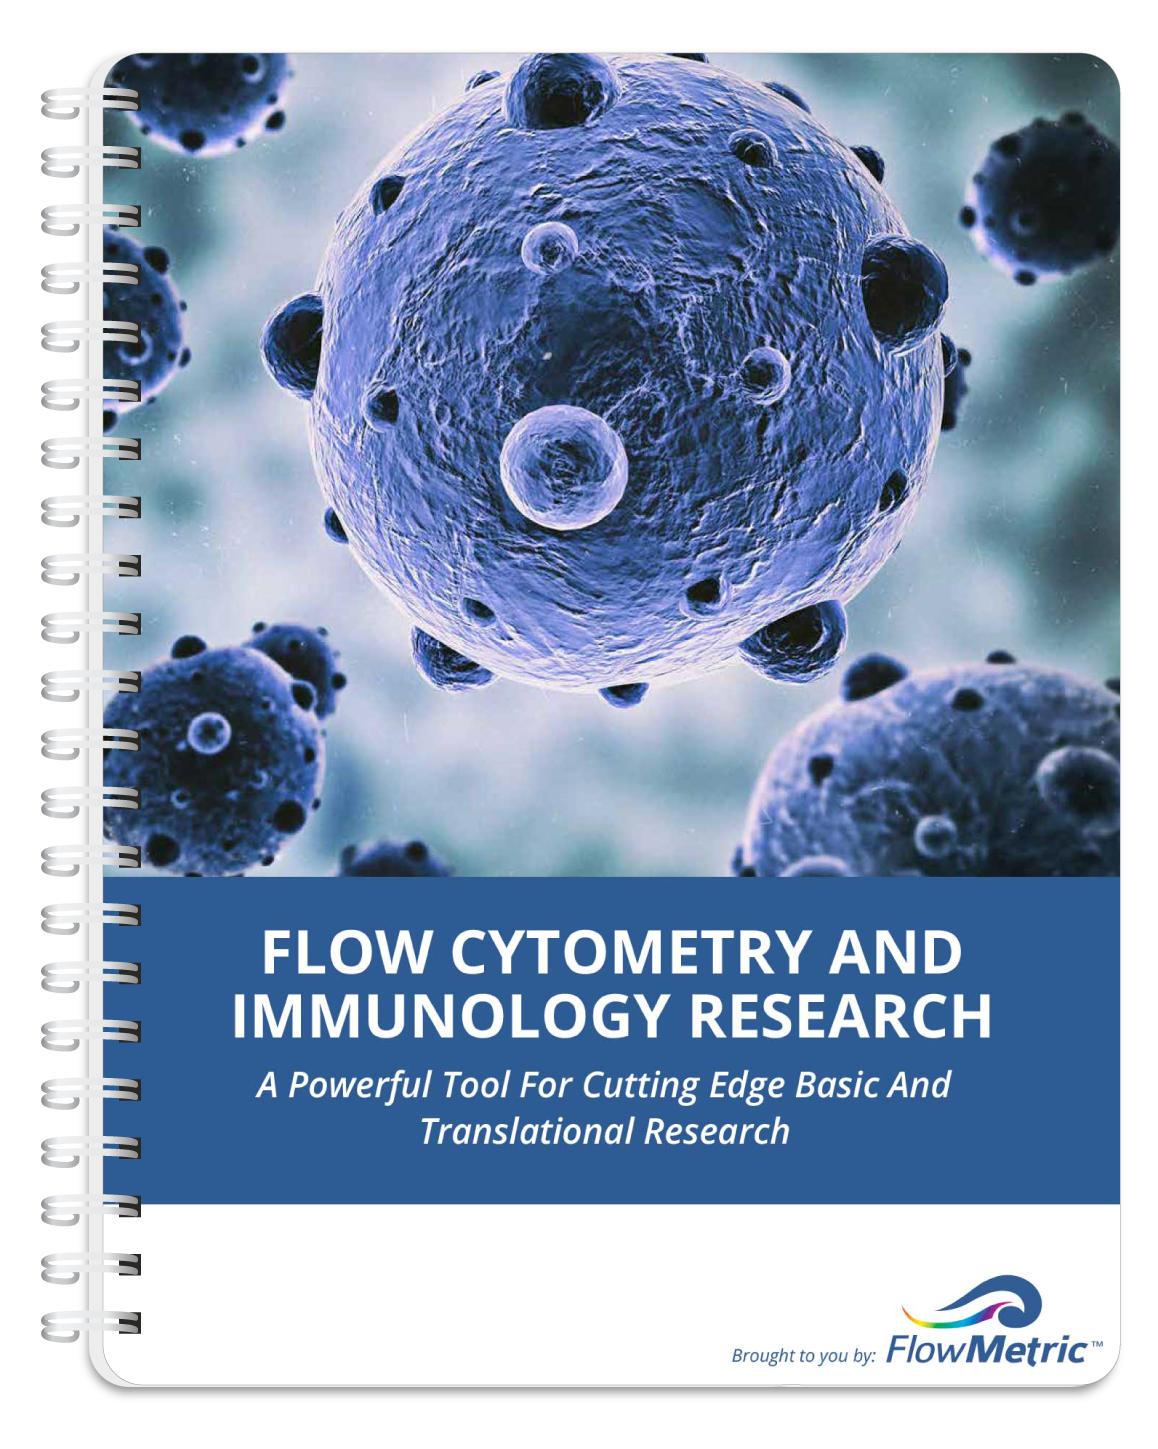 Flow Cytometry & Immunology Research - A Powerful Tool For Cutting Edge Basic And Translational Research